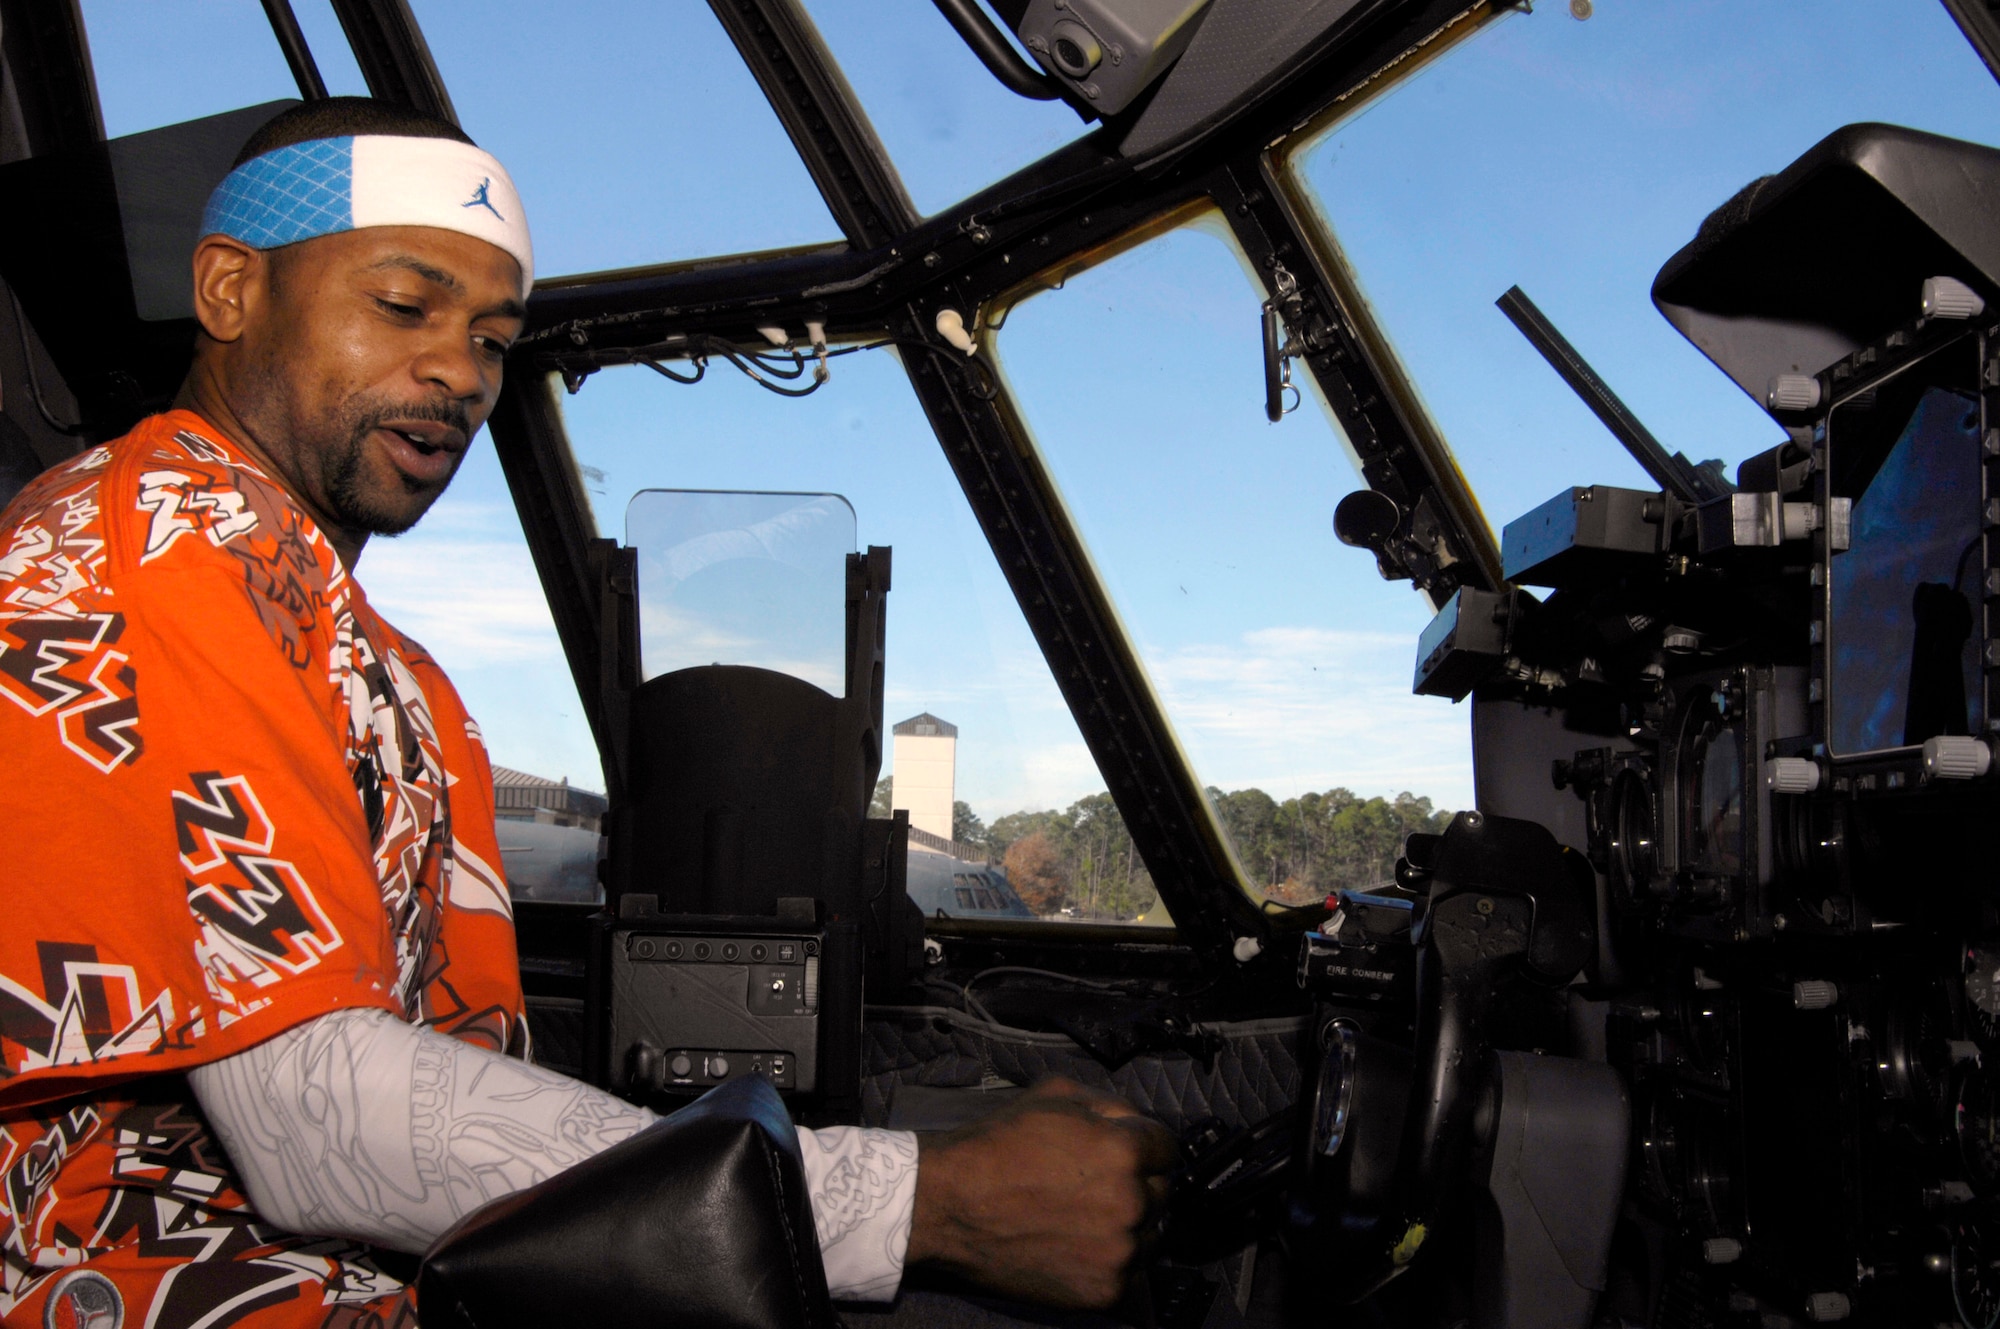 Professional boxer Roy Jones Jr. sits in the cockpit of an AC-130U Spooky Gunship Dec. 5 at Hurlburt Field, Fla. Mr. Jones, boxer Felix Trinidad and promoter Don King visited Hurlburt Field as part of their tour of military installation to show support for military members. (U.S. Air Force photo/Airman 1st Class Sheila deVera)
